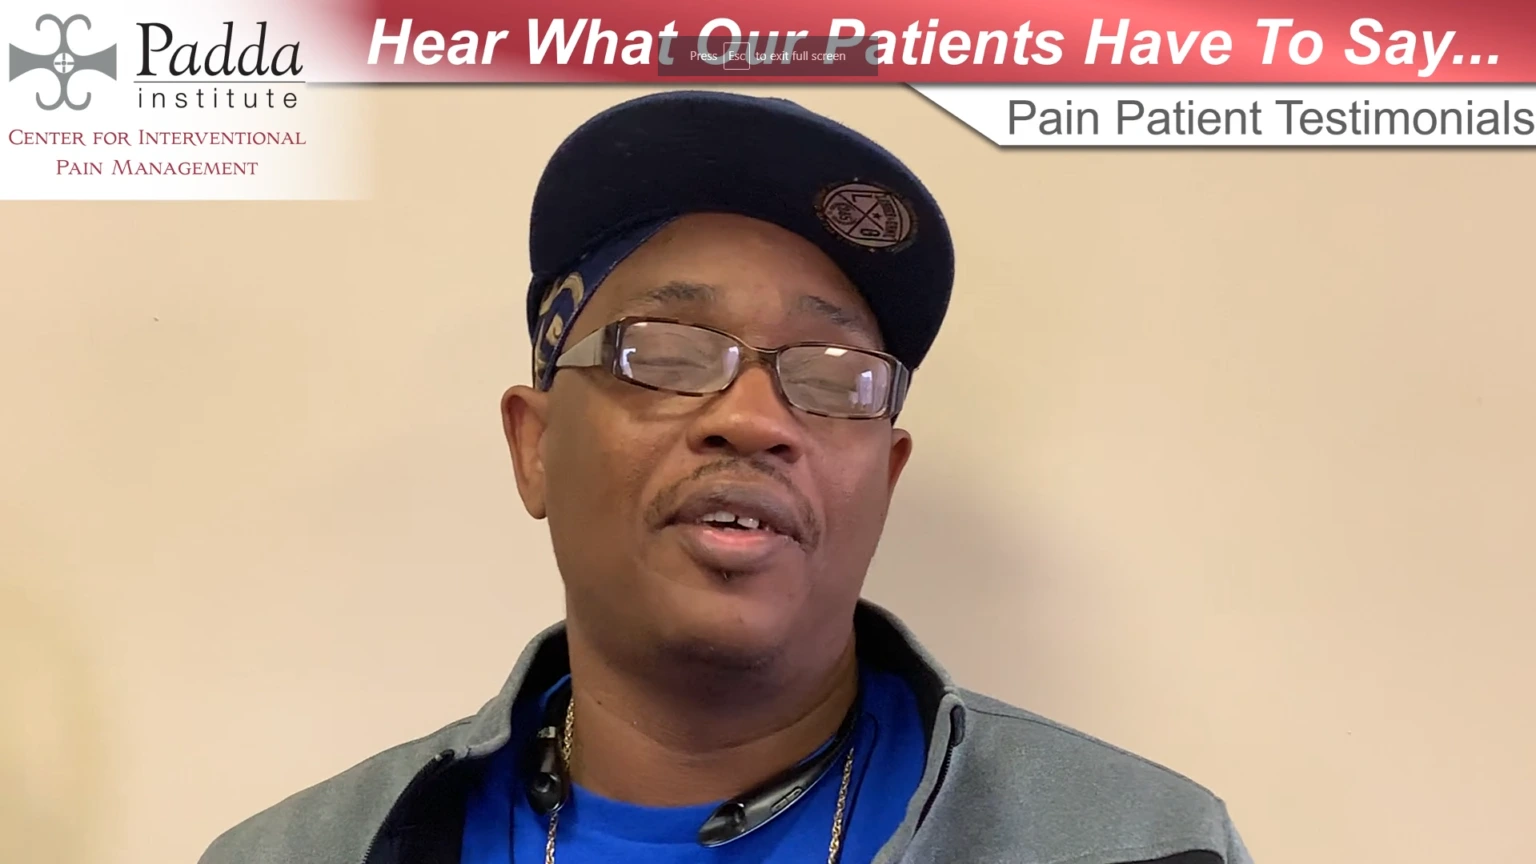 Hear What Our Patients Say About Pain Treatment